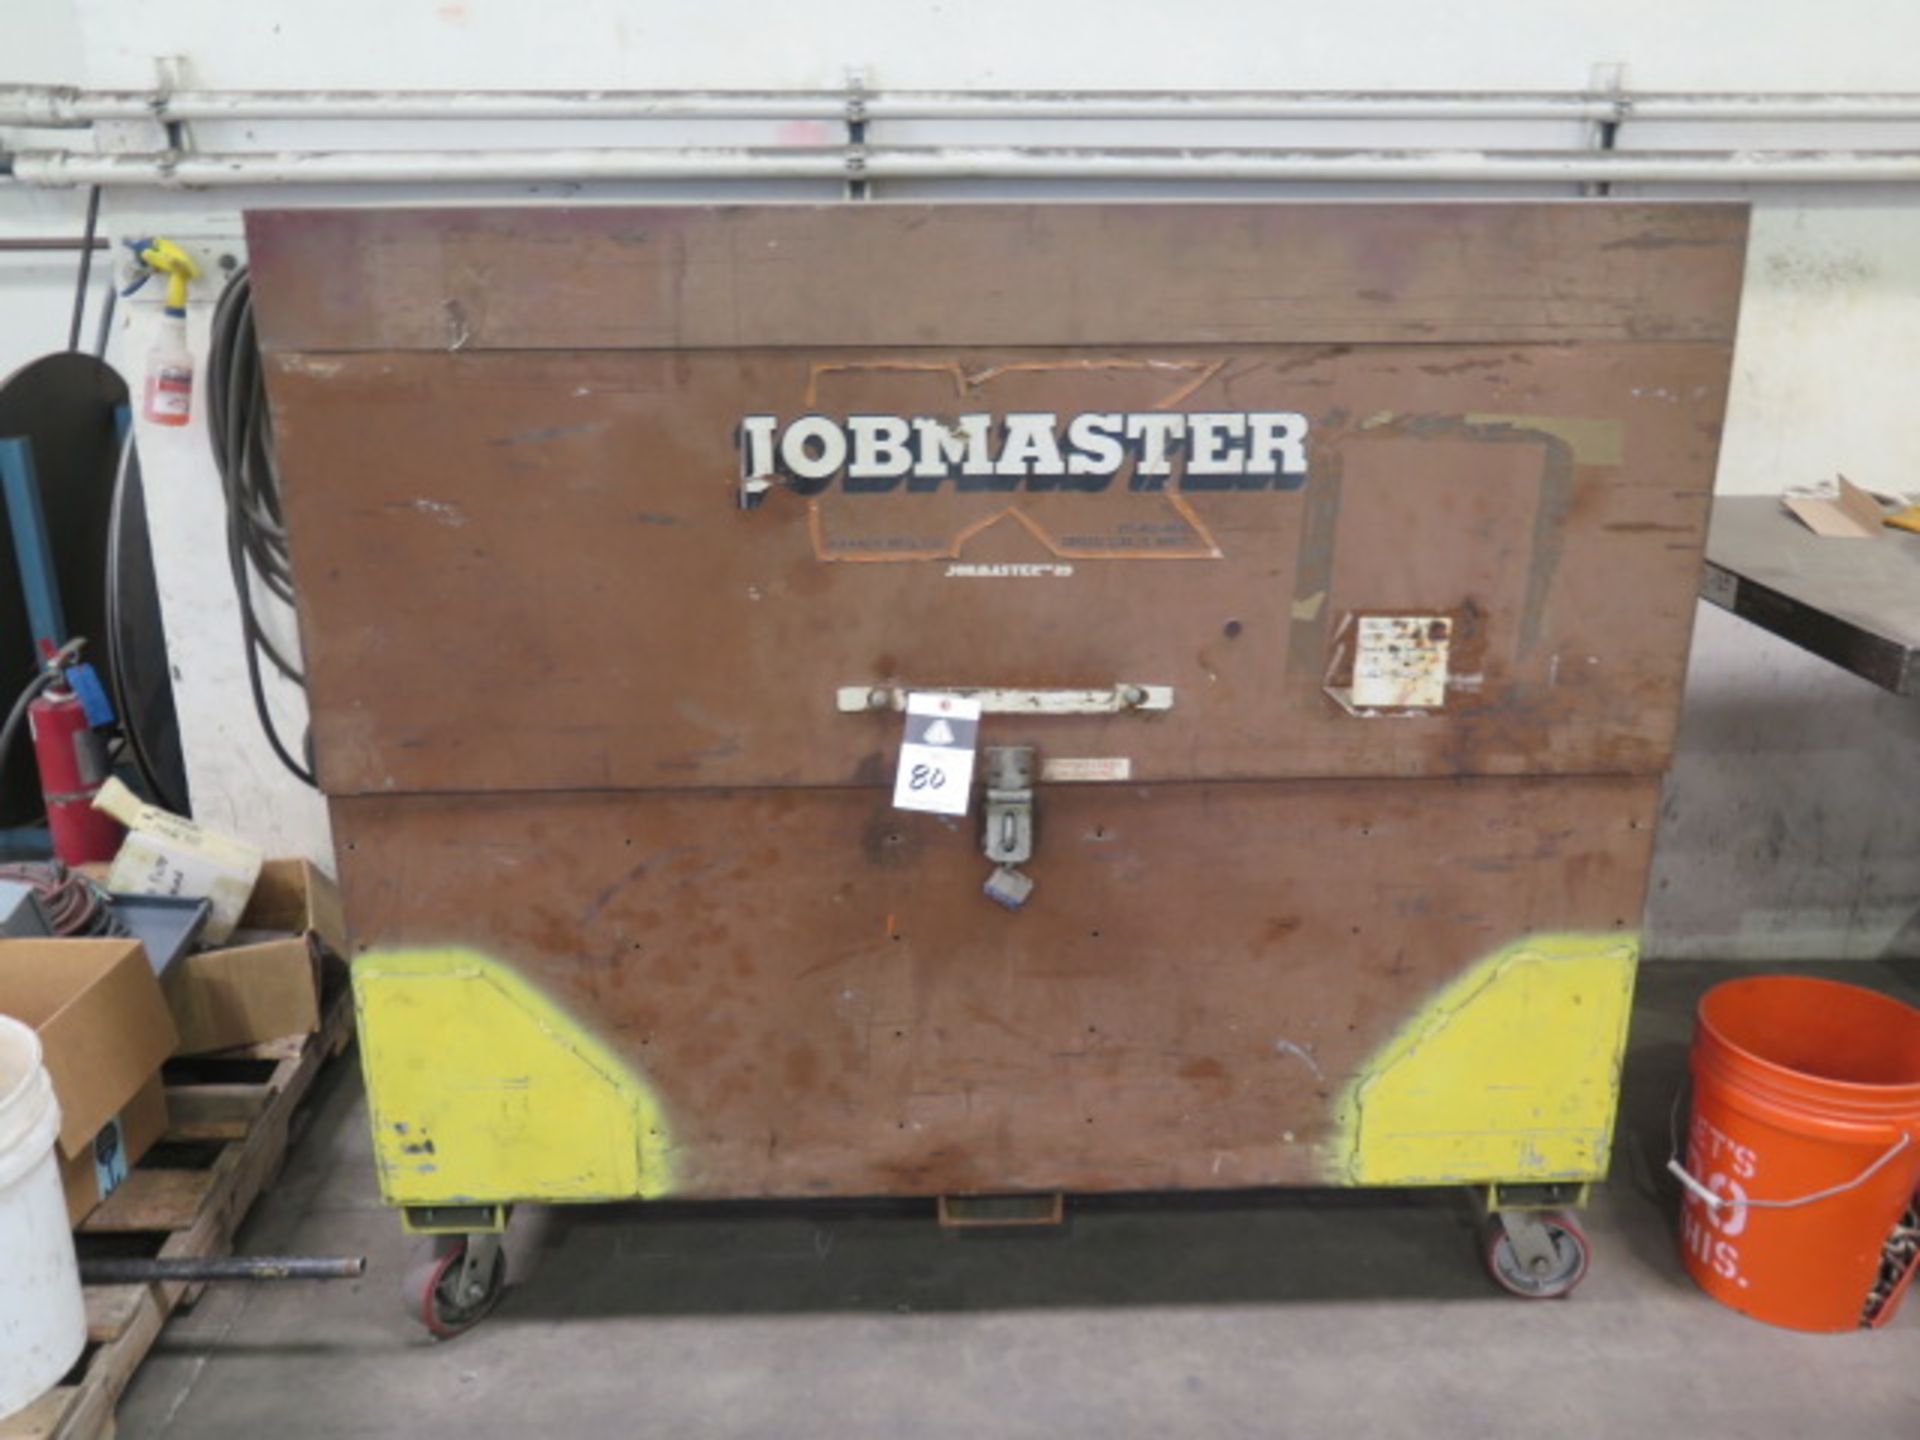 Jobmaster Rolling Job Box (SOLD AS-IS - NO WARRANTY)